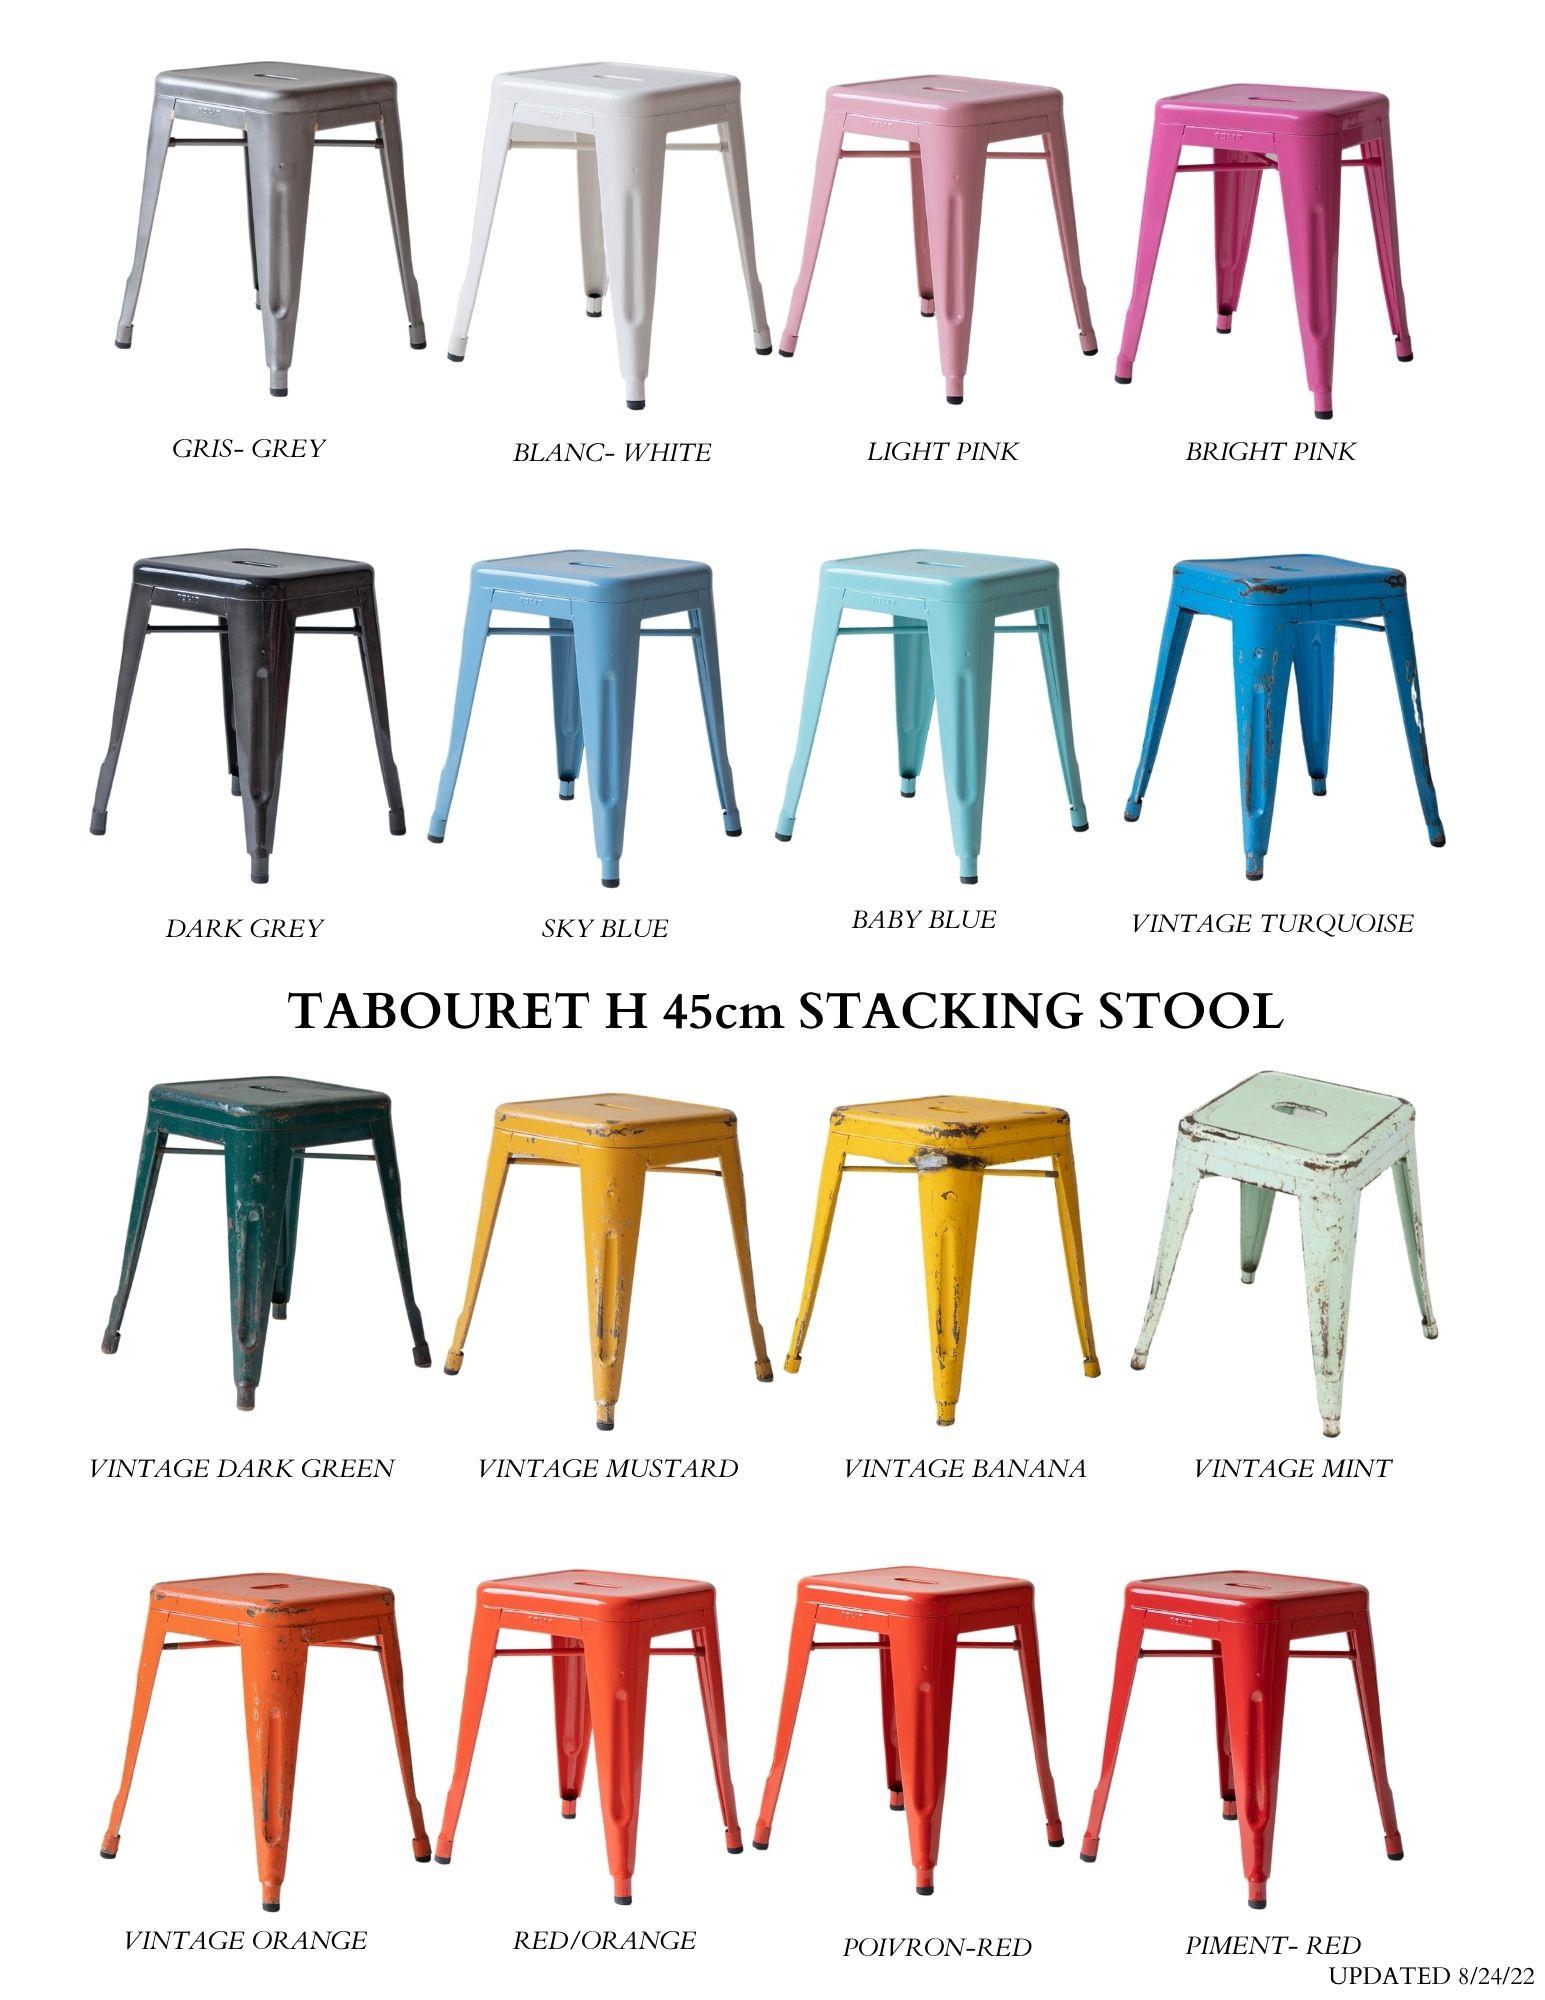 Genuine French Tolix Set of '4' Steel Stacking Stools Hundreds More in Stock 2